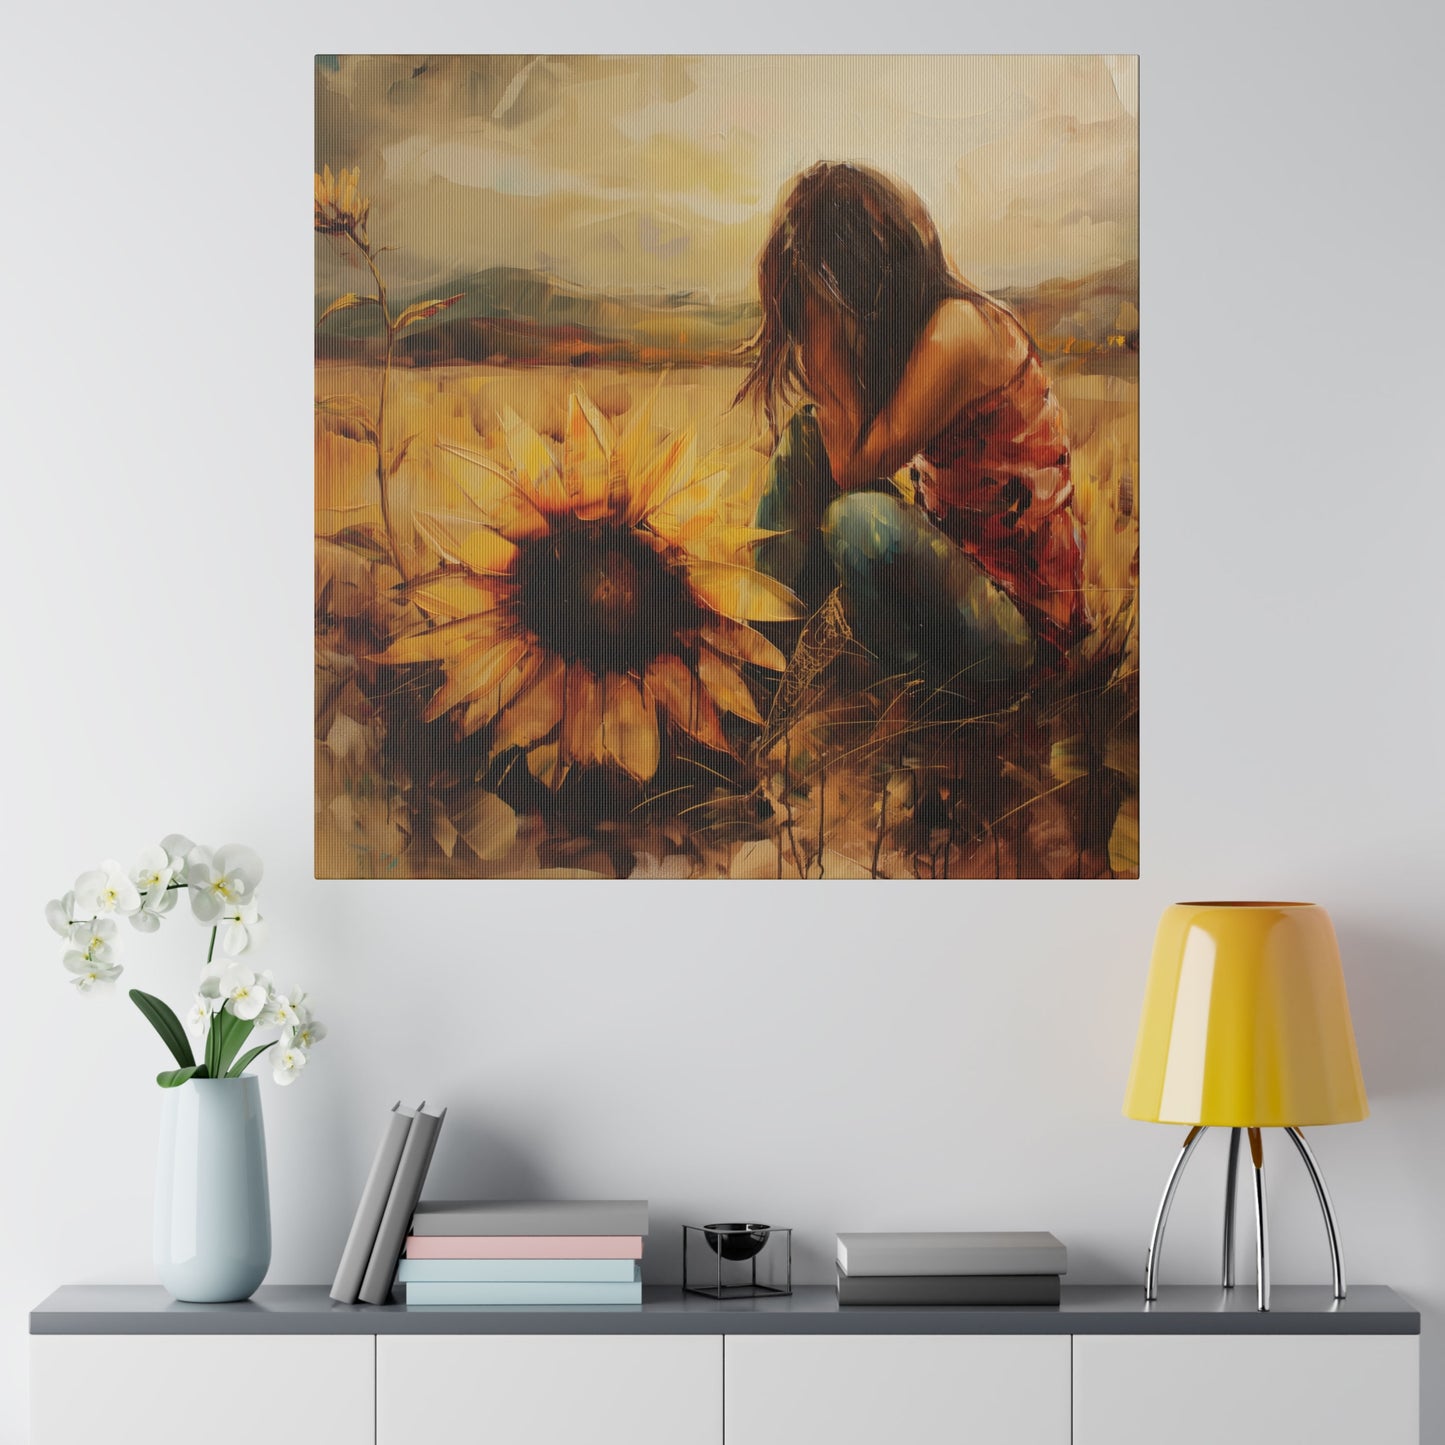 A painting capturing the emotive art of a human experience, with a person sitting amongst sunflowers symbolizing loyalty and adoration, hangs above a modern sideboard with decorative items.
Elena Duval: Solace in Solitude. Exclusive Canvas Print by Printify.